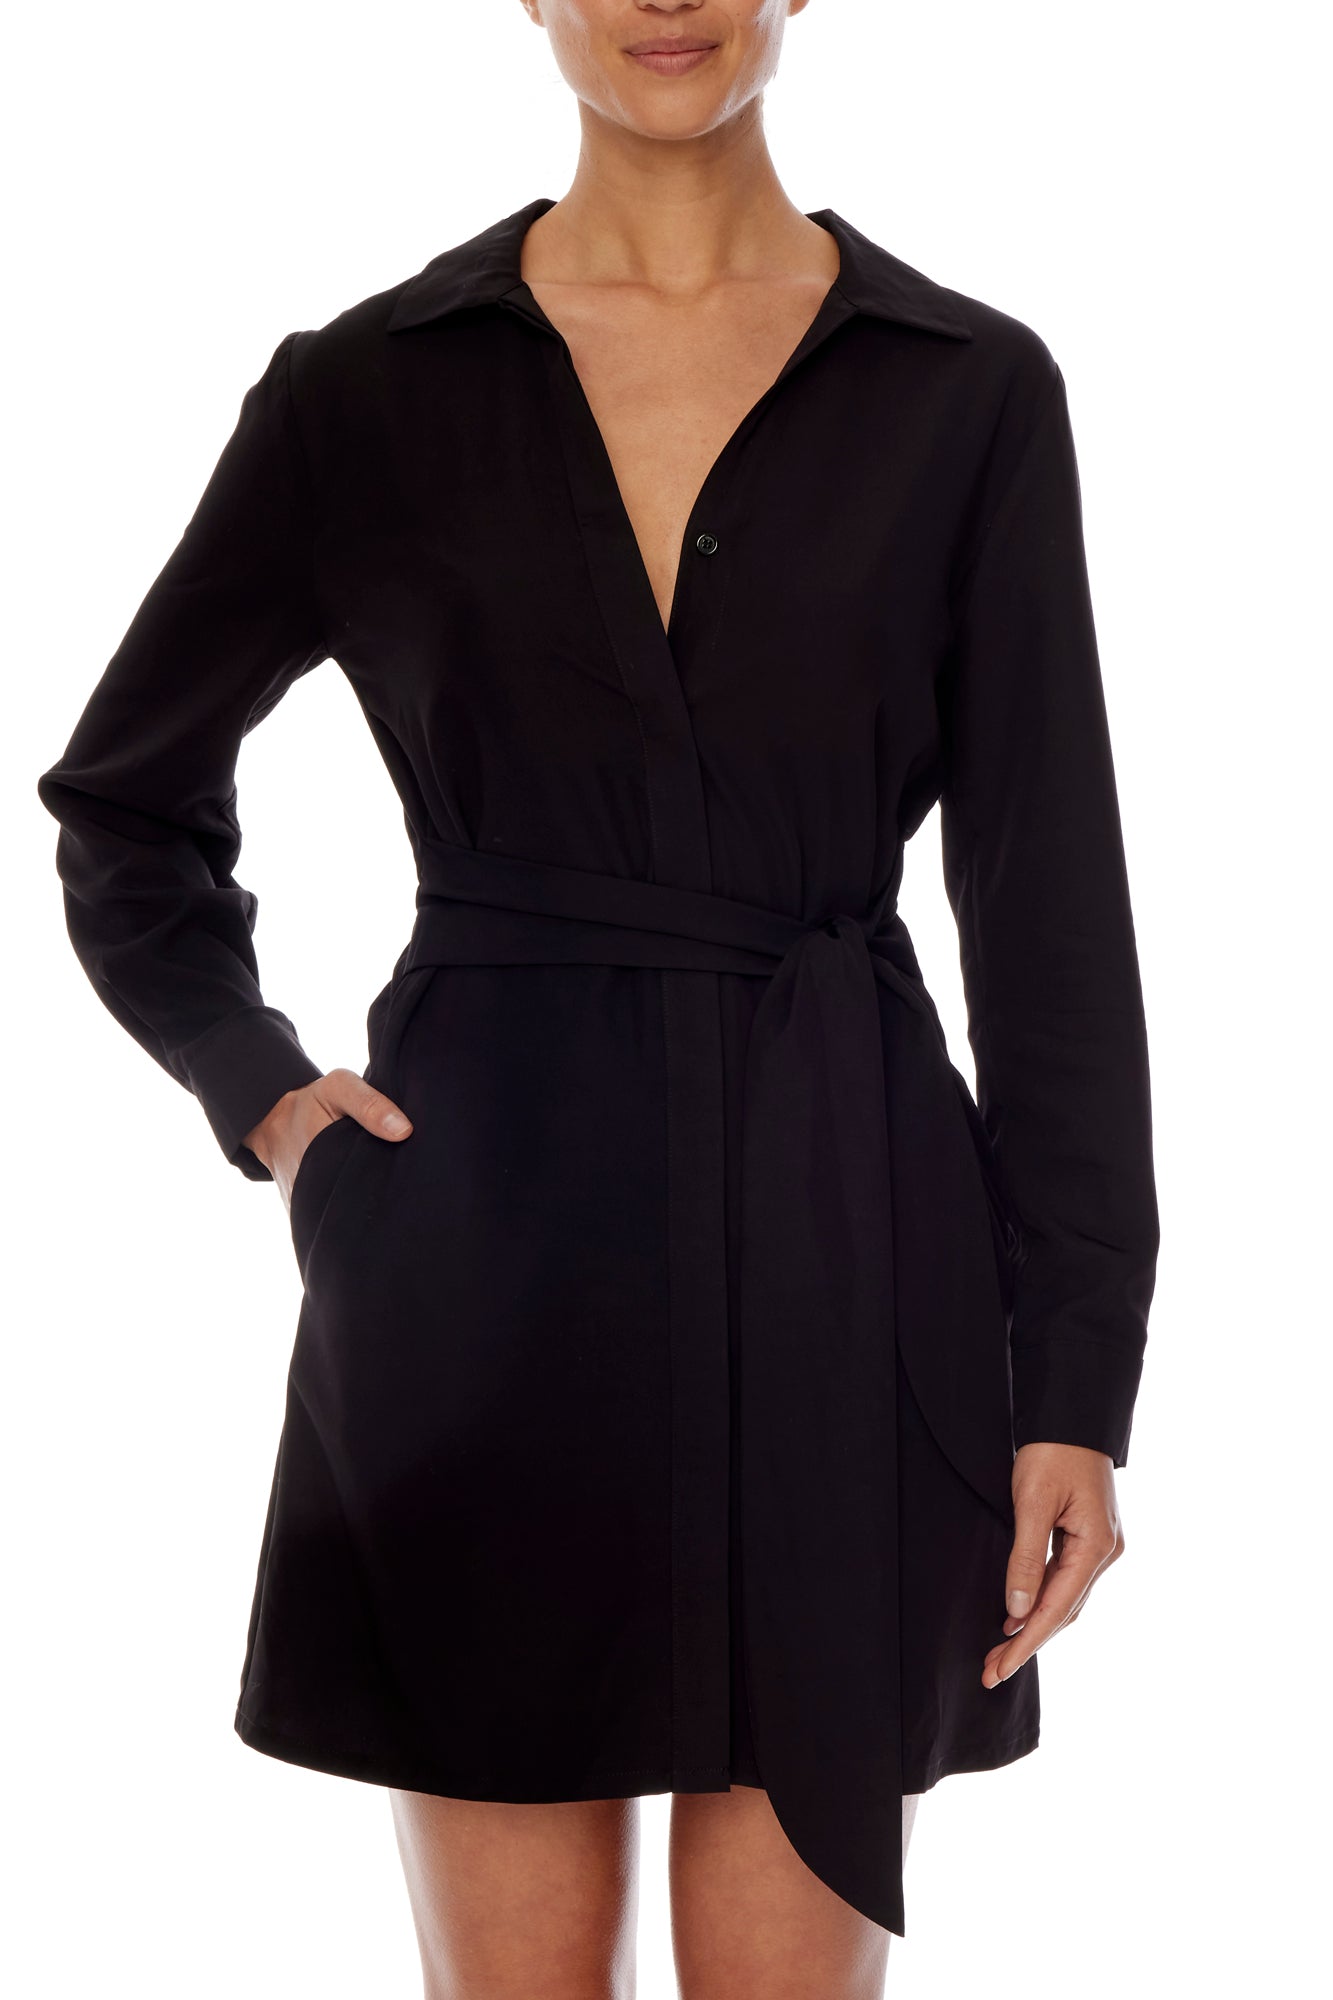 button down dress with long cuffed sleeves, collar, tie waist, cinched back,  pockets and mini length in black